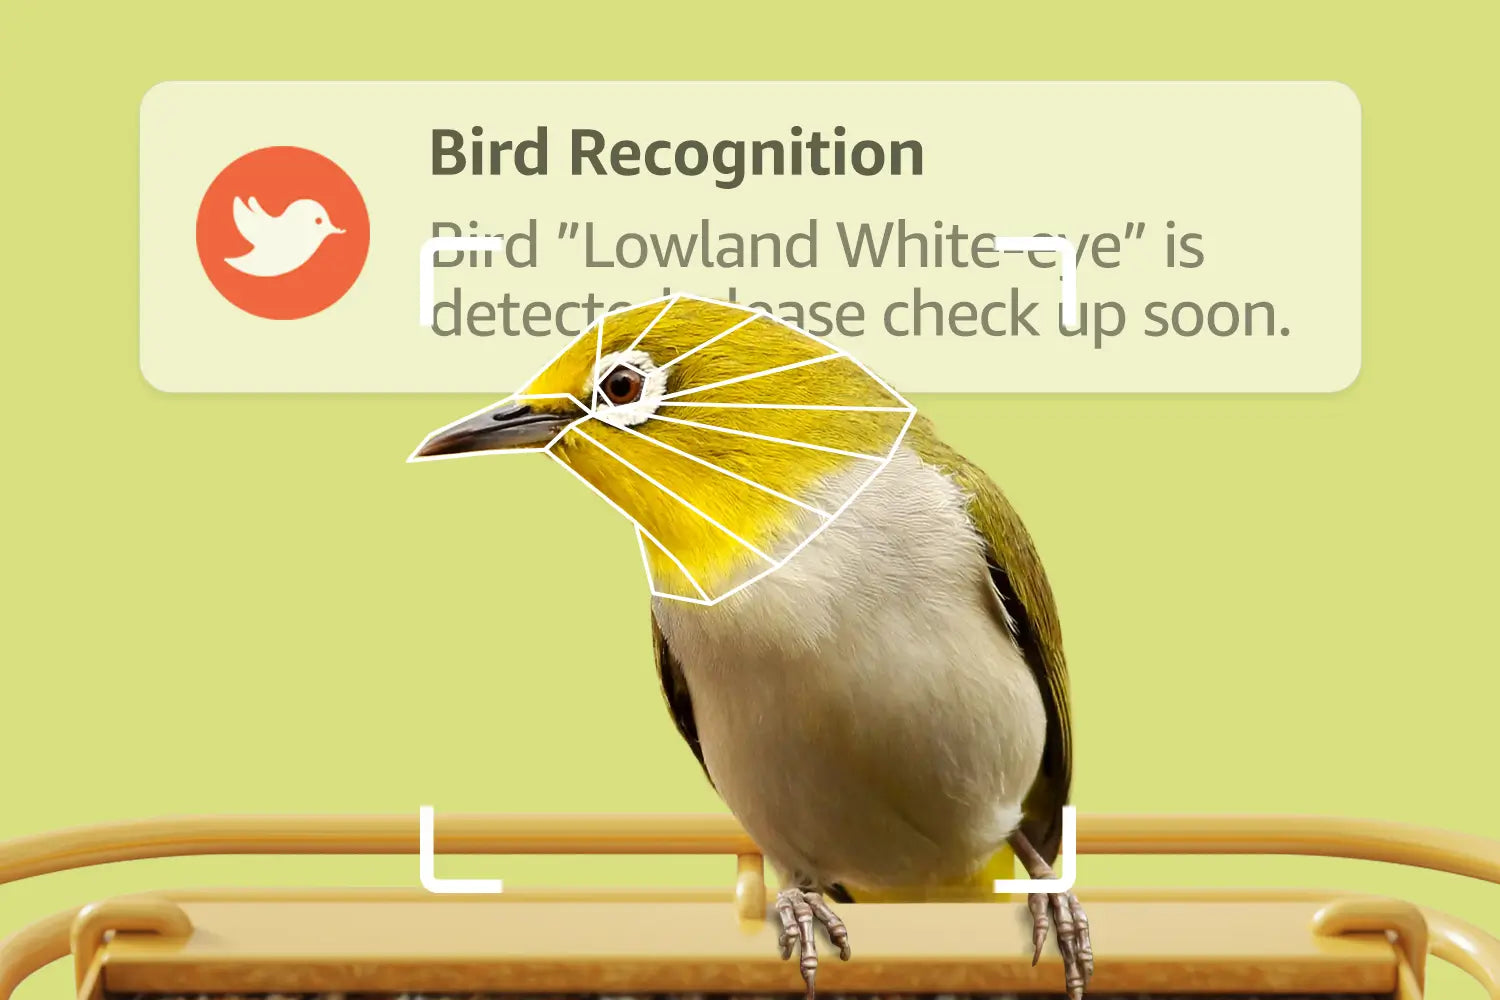 Free professional AI bird identification to discover all the birds in your backyard!